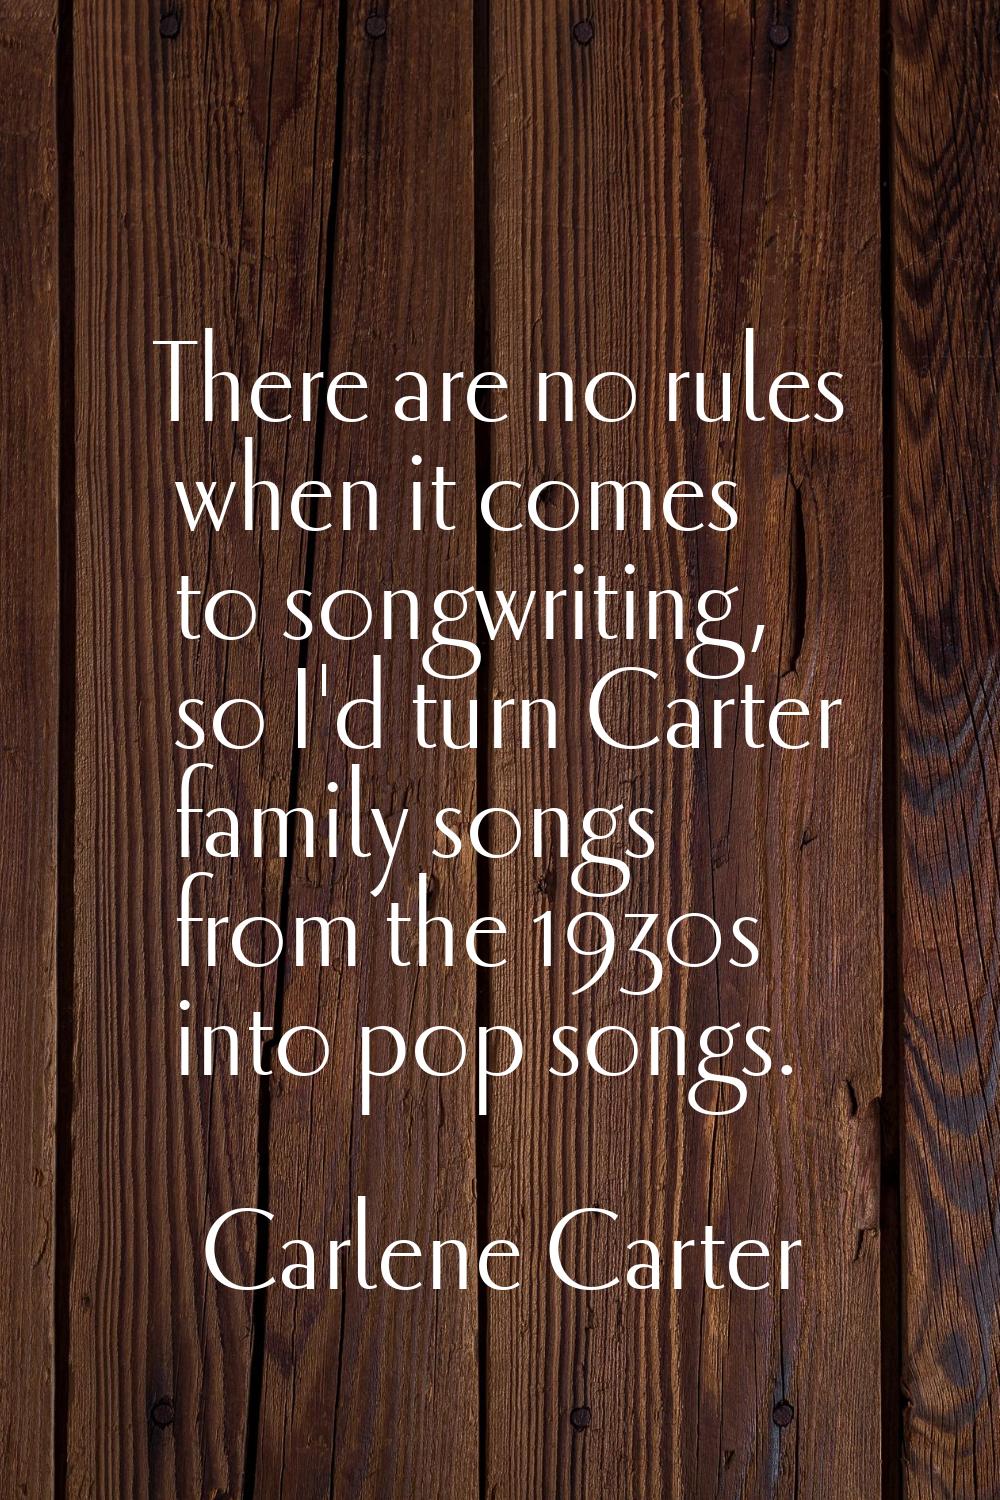 There are no rules when it comes to songwriting, so I'd turn Carter family songs from the 1930s int